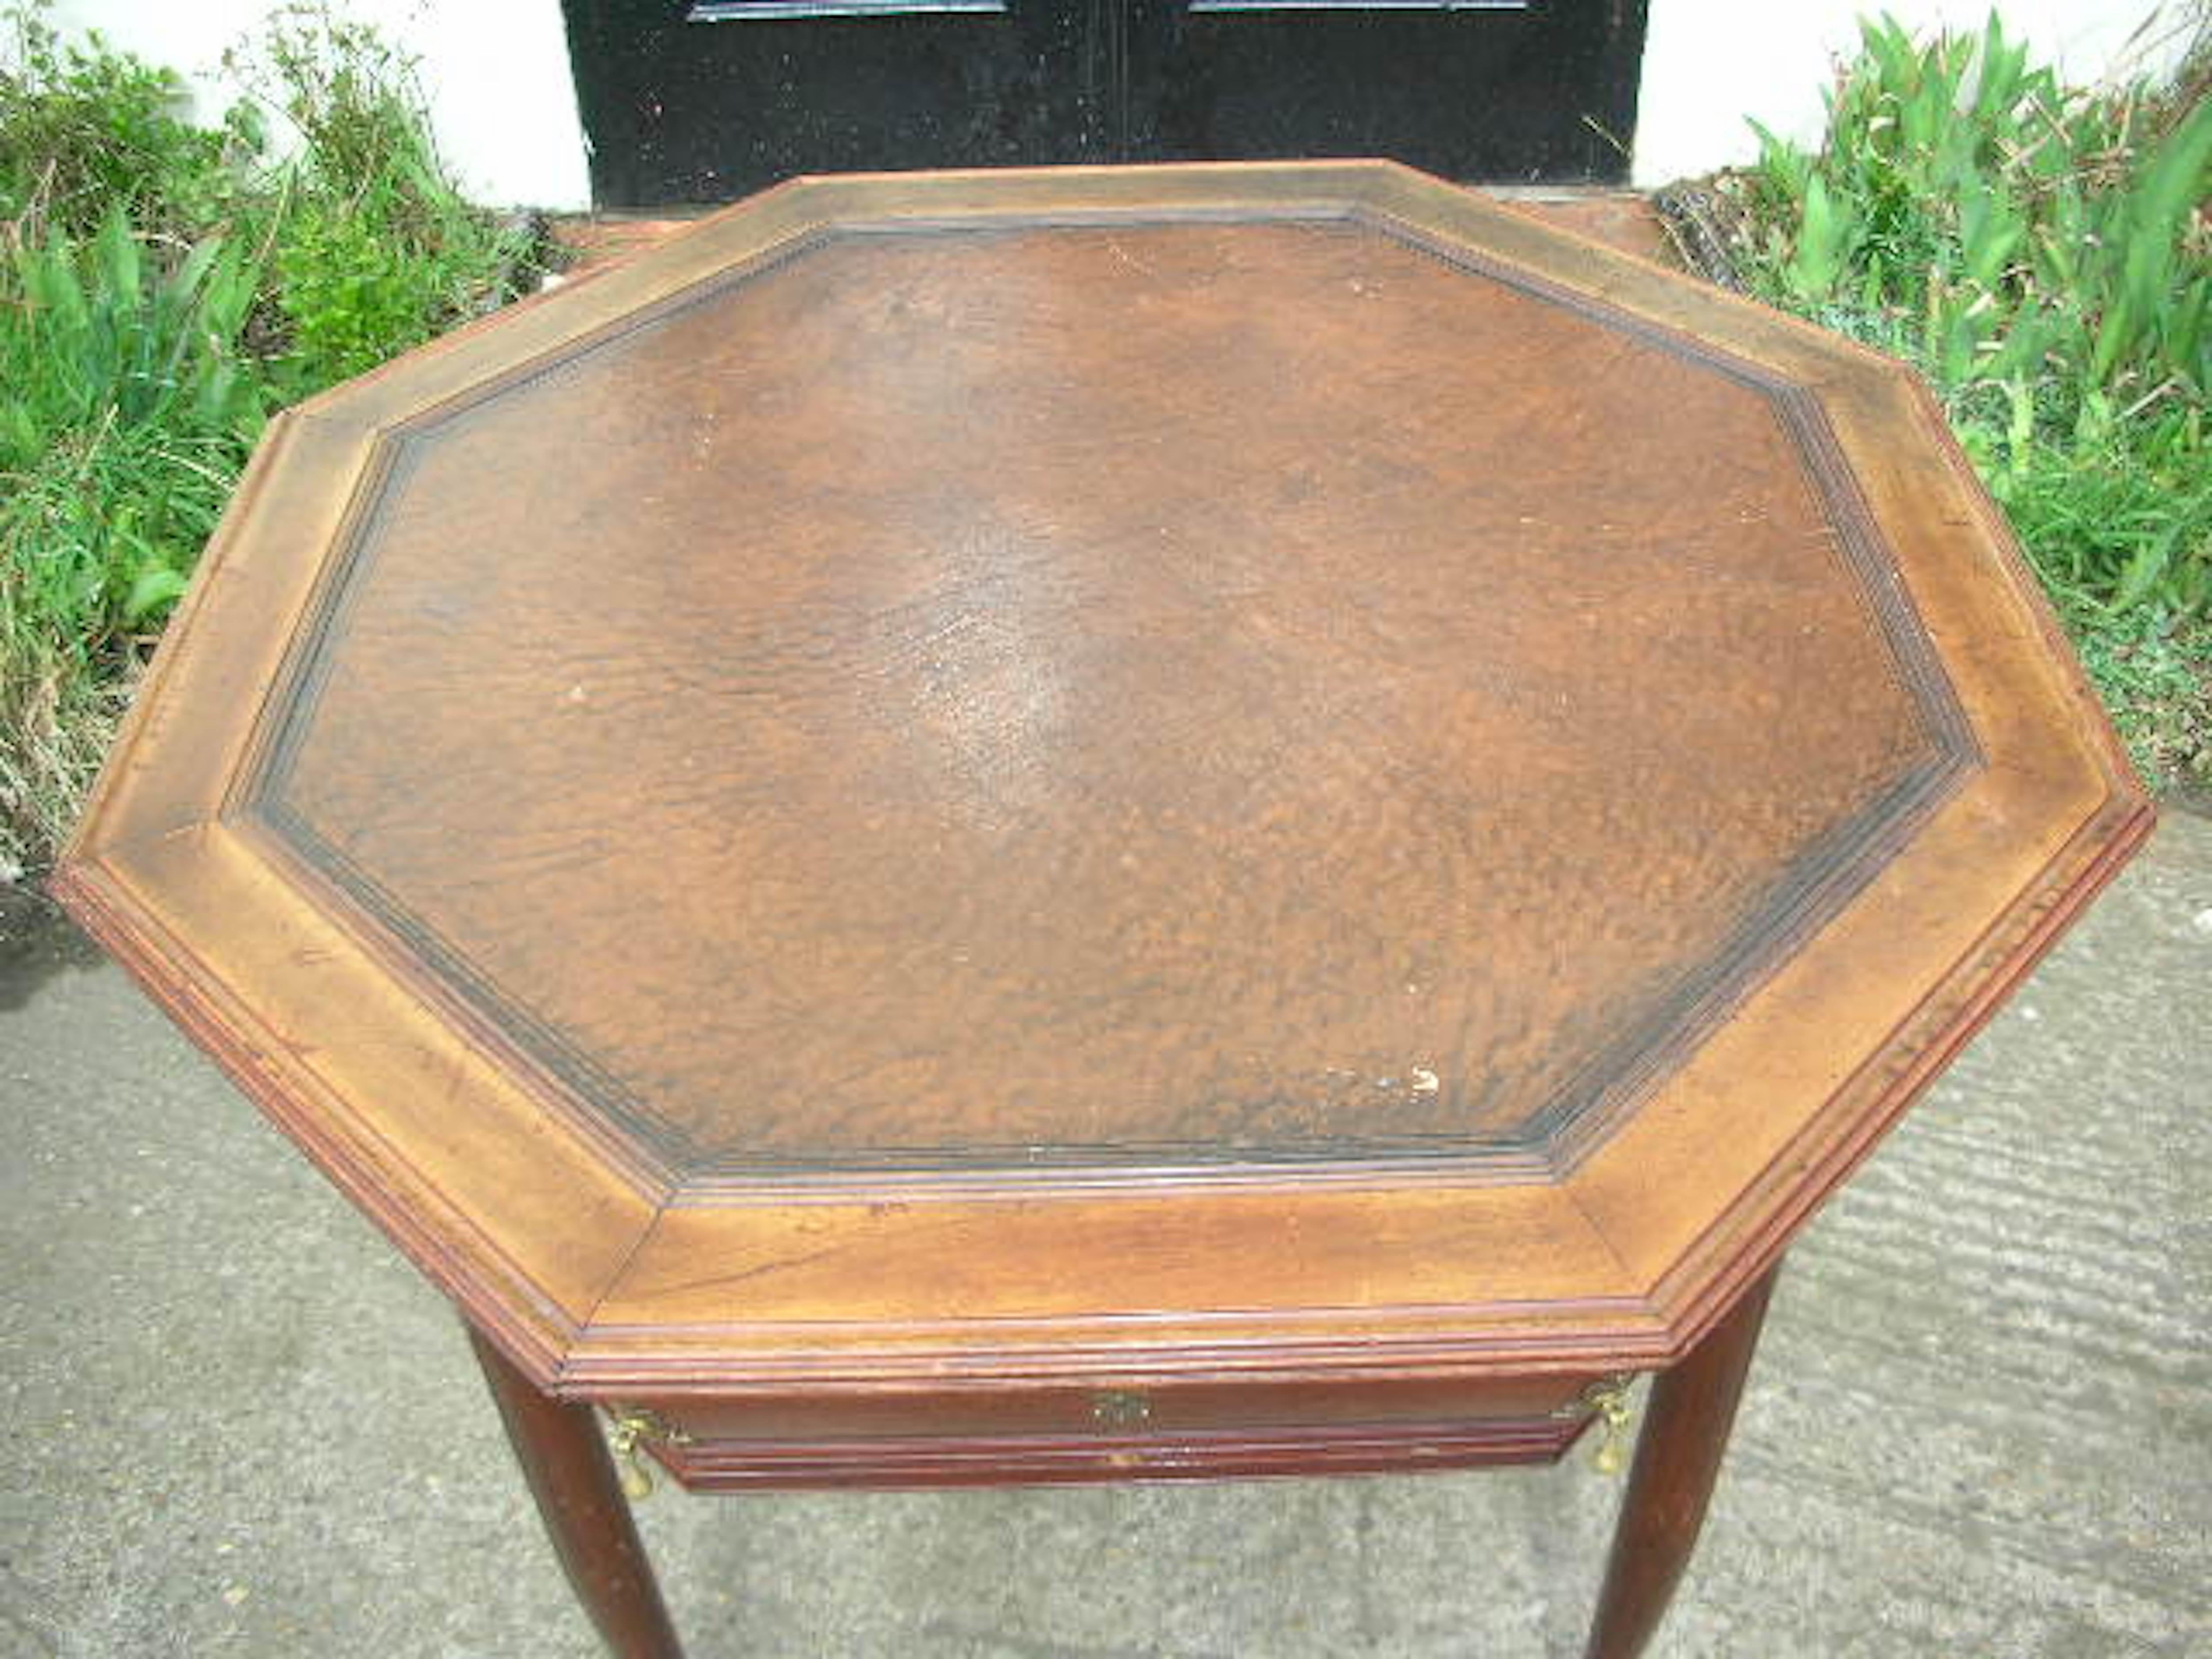 A continental walnut octagonal center table with drawers, circa 1900, in the manner of Henry Van der Velde, the leather inset top with border tramlines, two opposing frieze drawers with conforming mouldings, on four swelling rounded and moulded legs